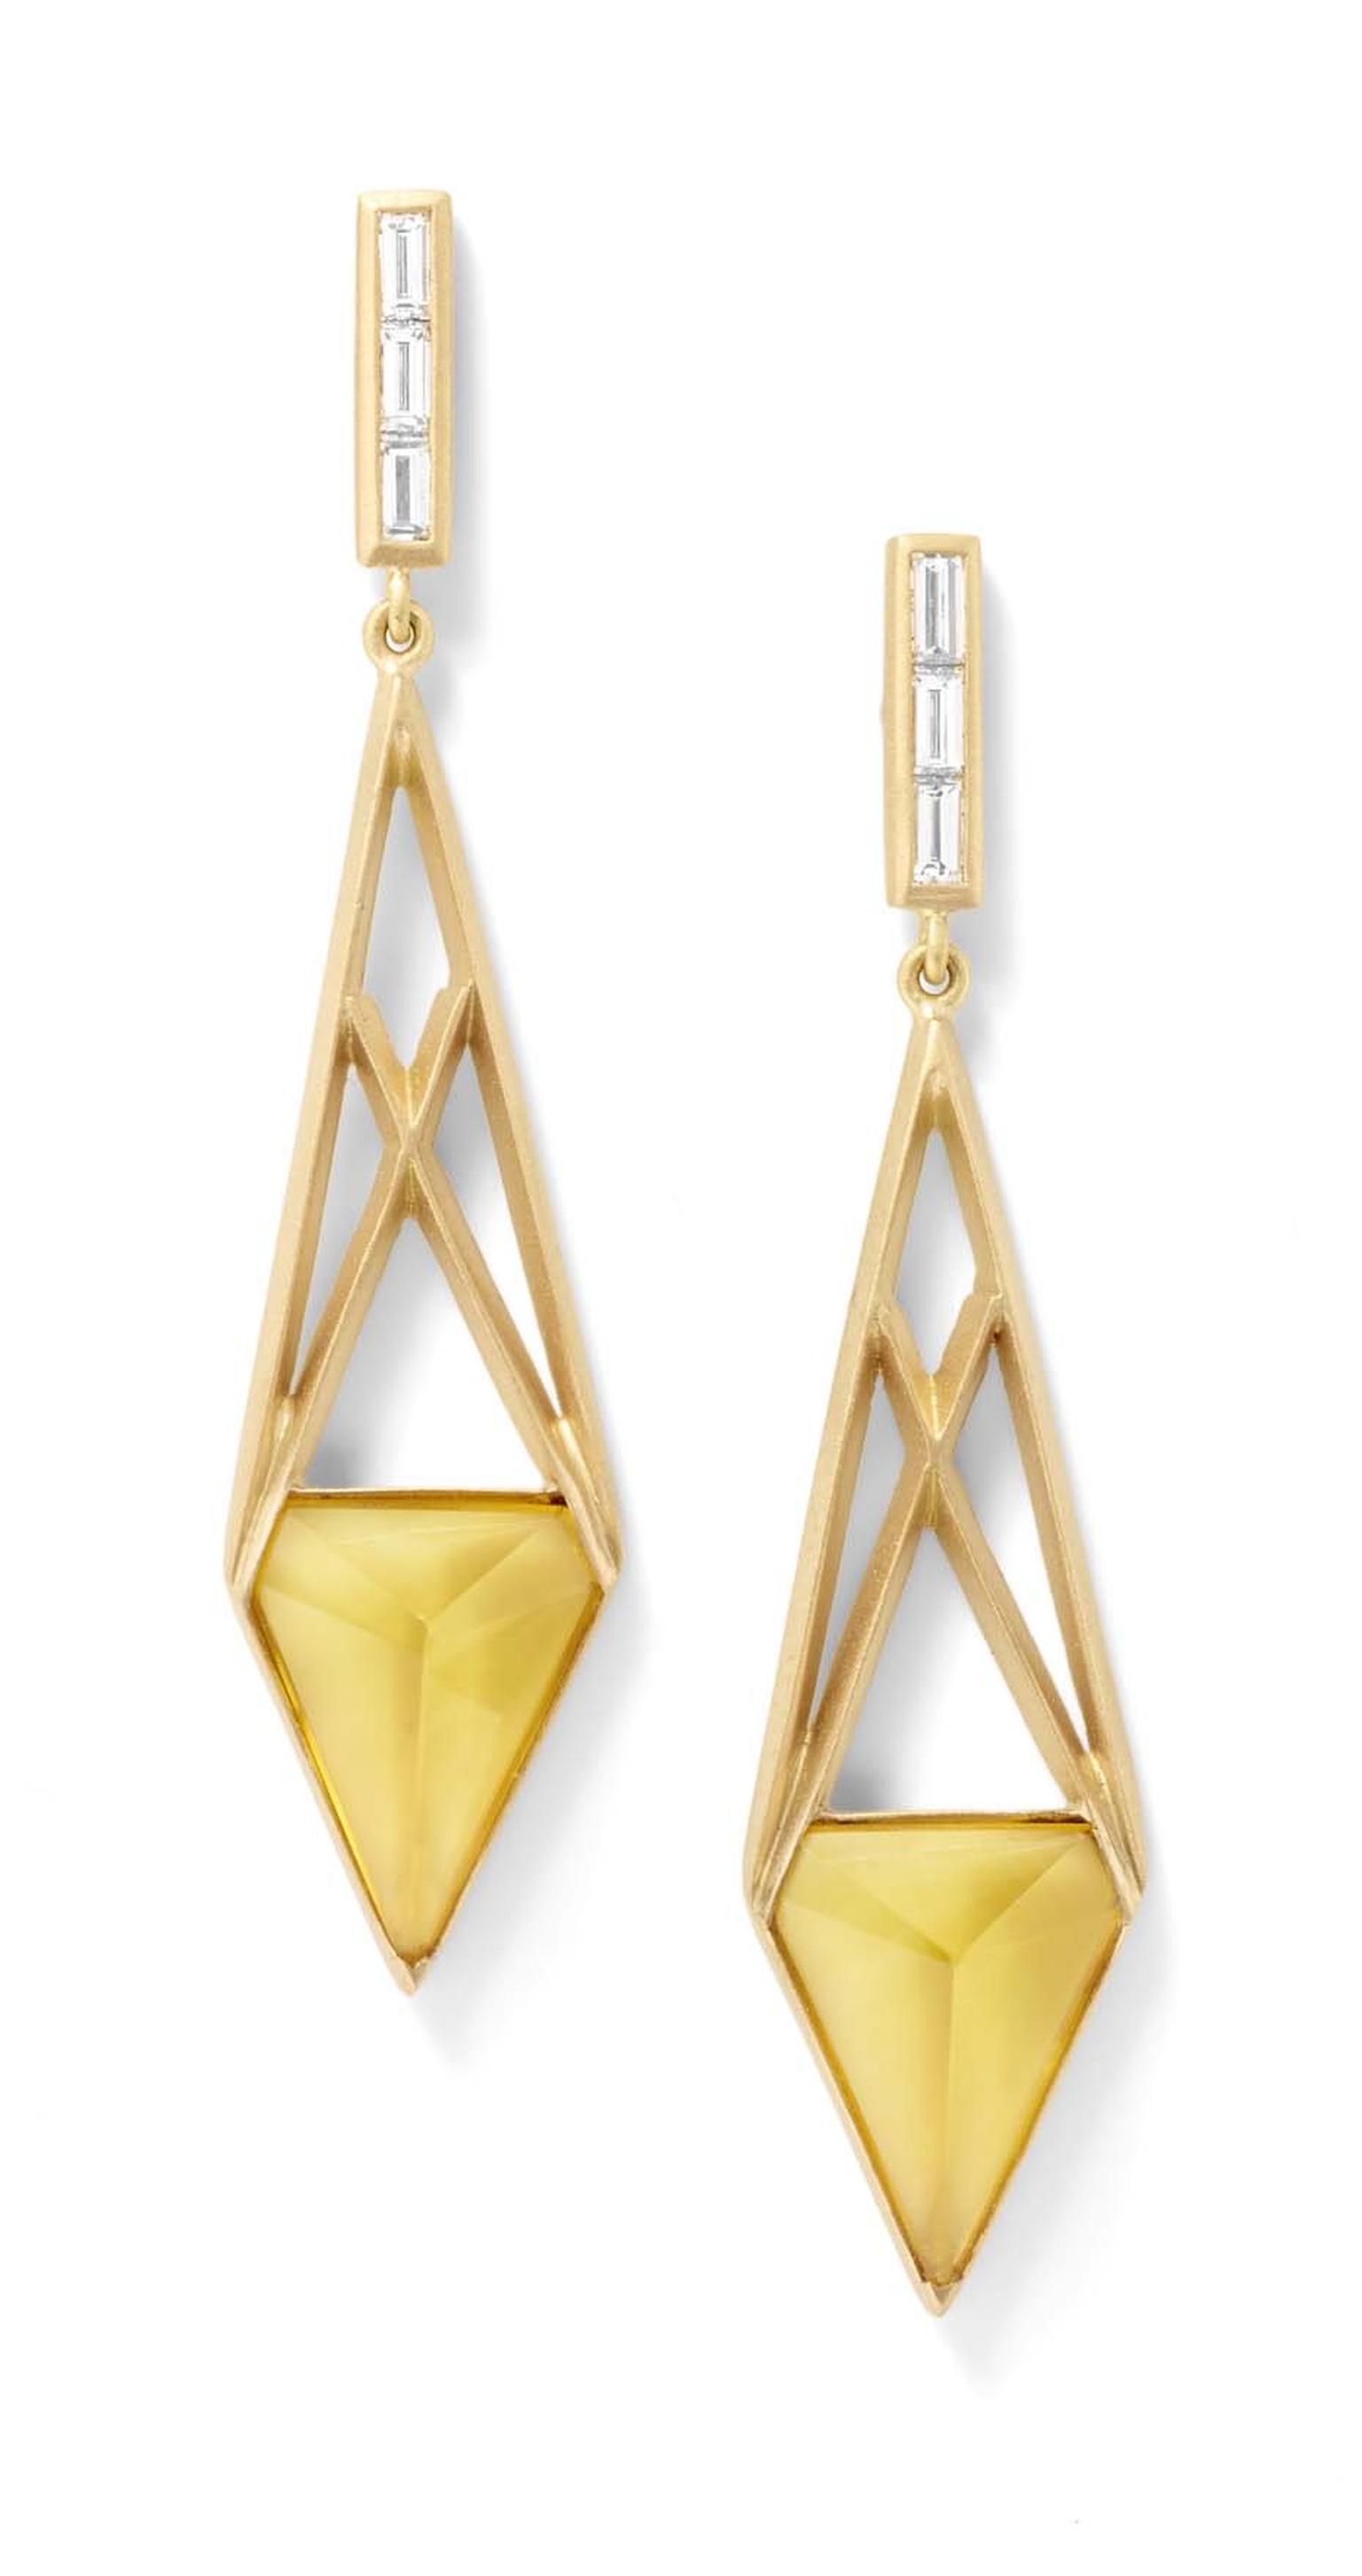 Monique Pean citrine open cage earrings in recycled yellow gold with baguette-cut diamonds